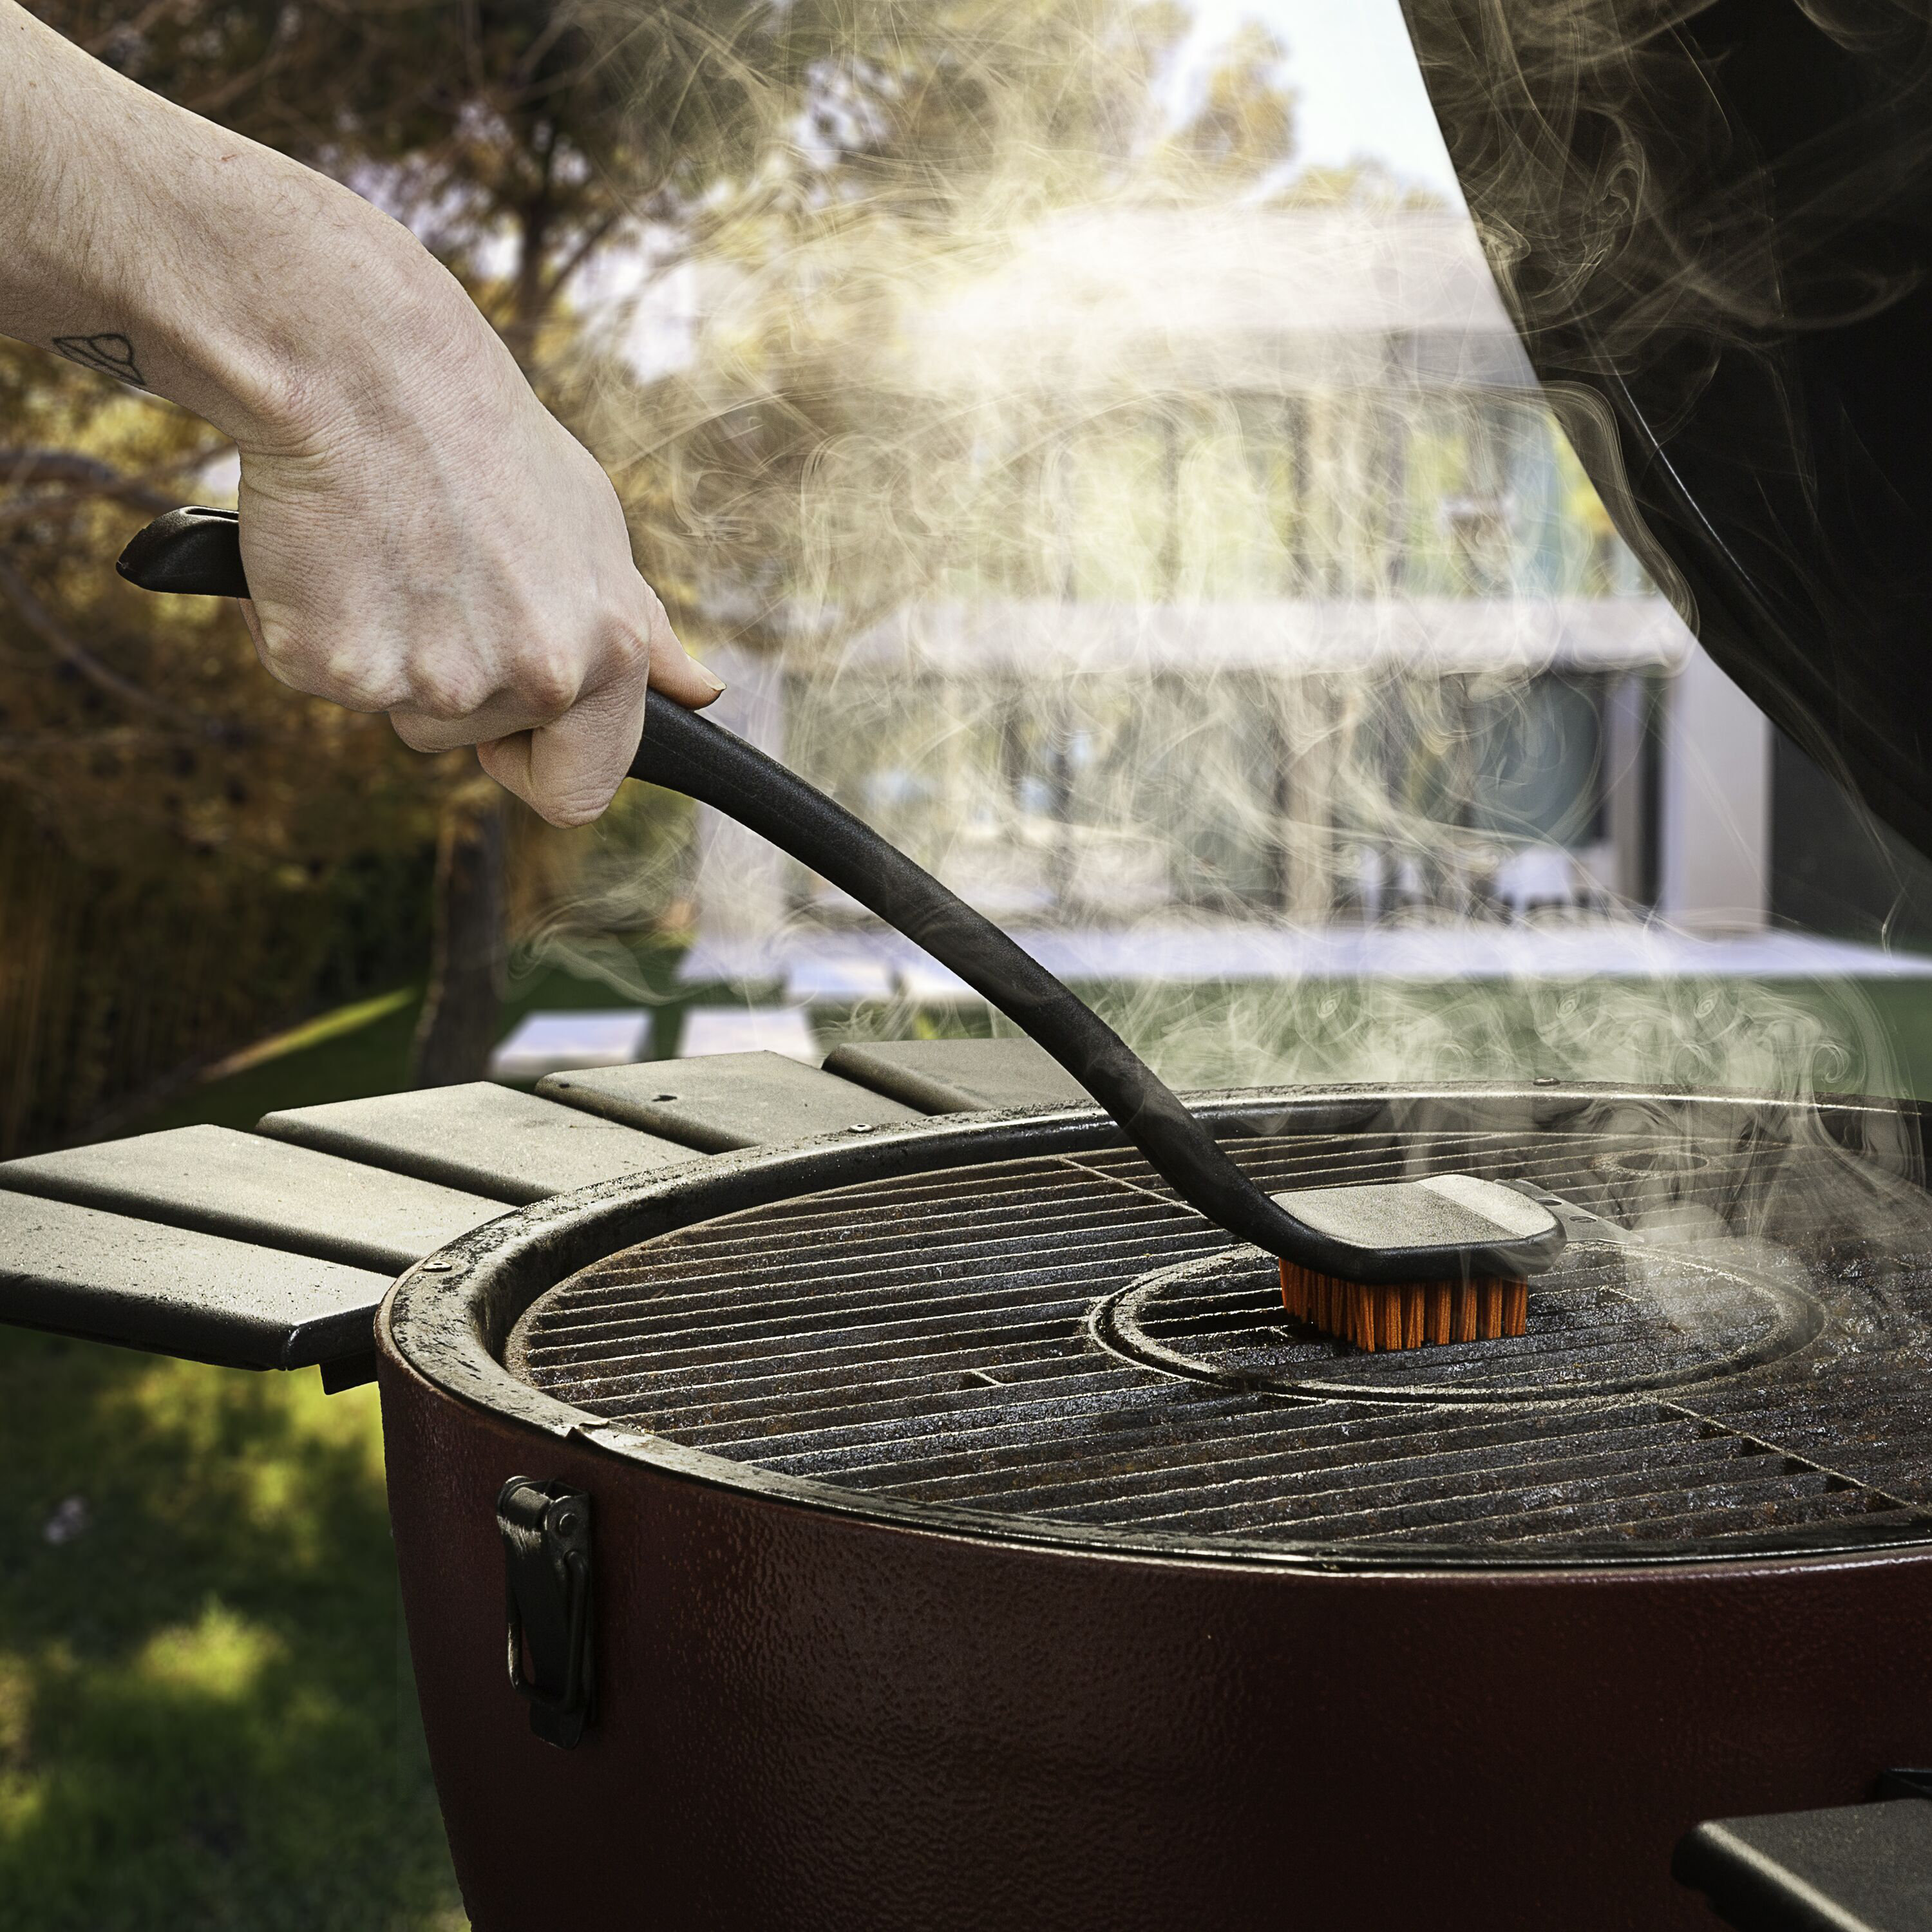 Grill Brush & Scraper Bristle Free | Safe Stainless Steel Cleaning | All  BBQ Grates | Gas or Charcoal Grills | Wood and Pellet Smoker | Weber | Best